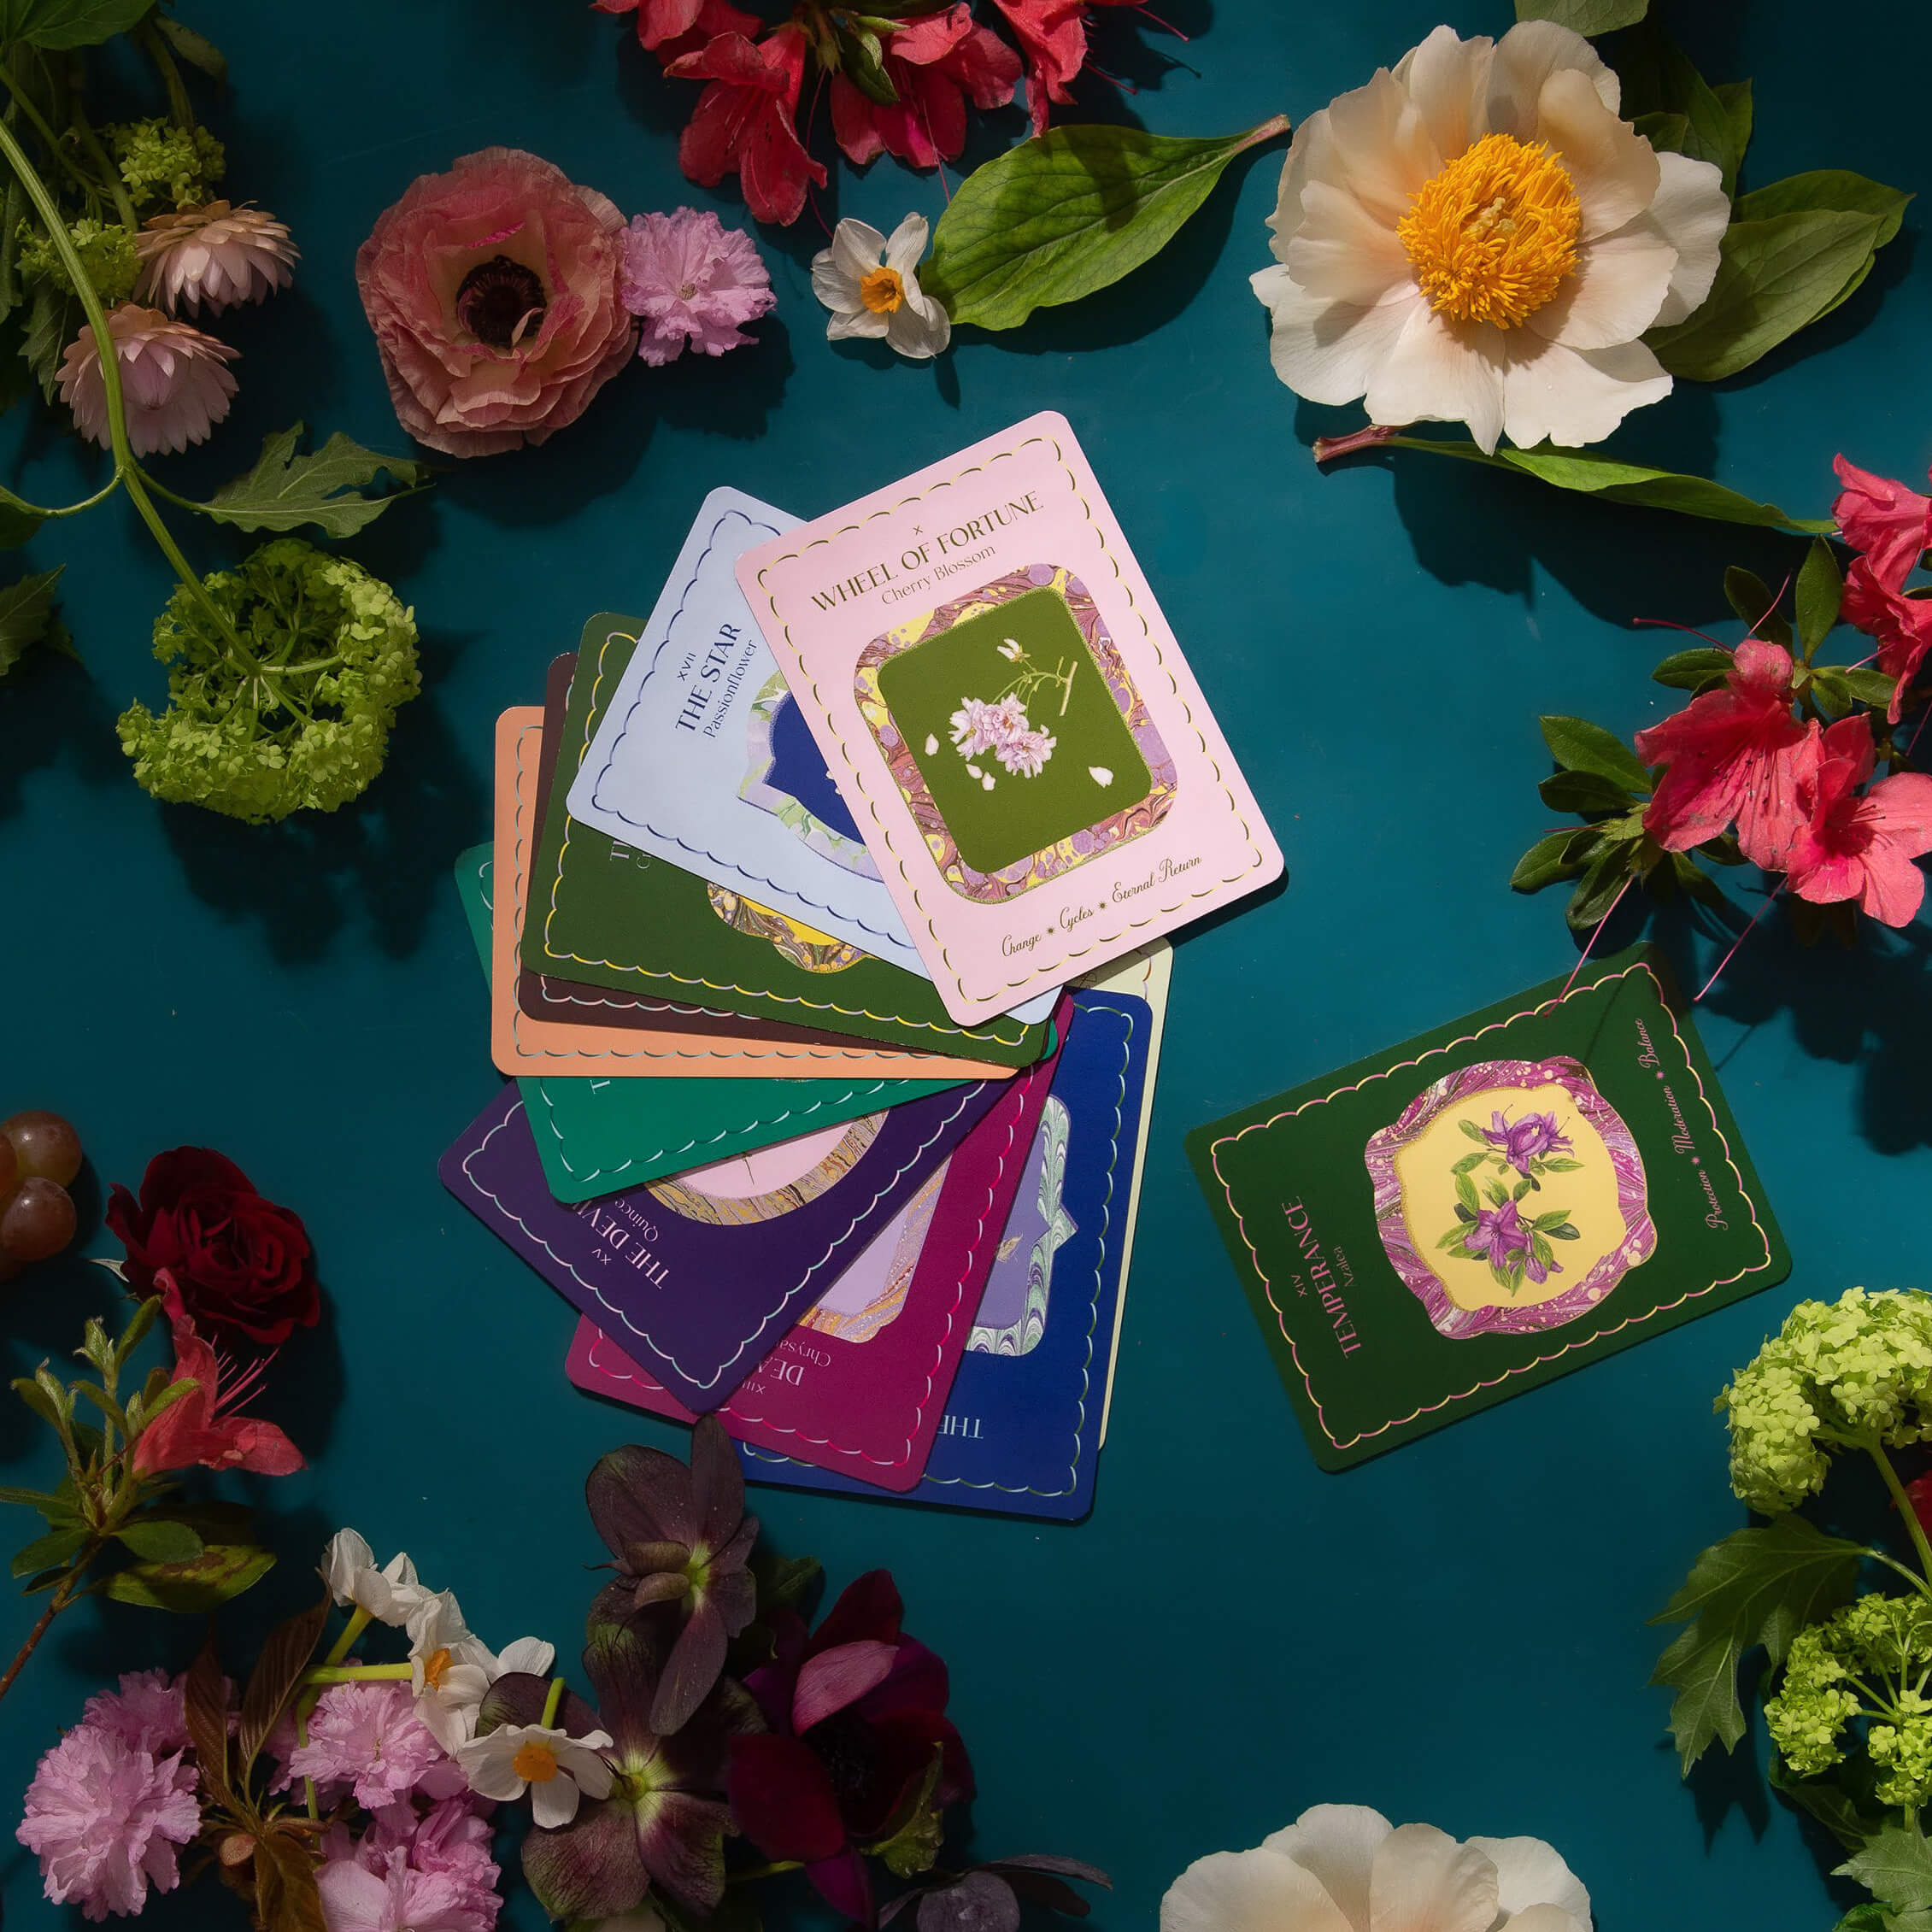 A hand of The Garden Journey cards lies fanned out on a beautiful flower-strewn table.